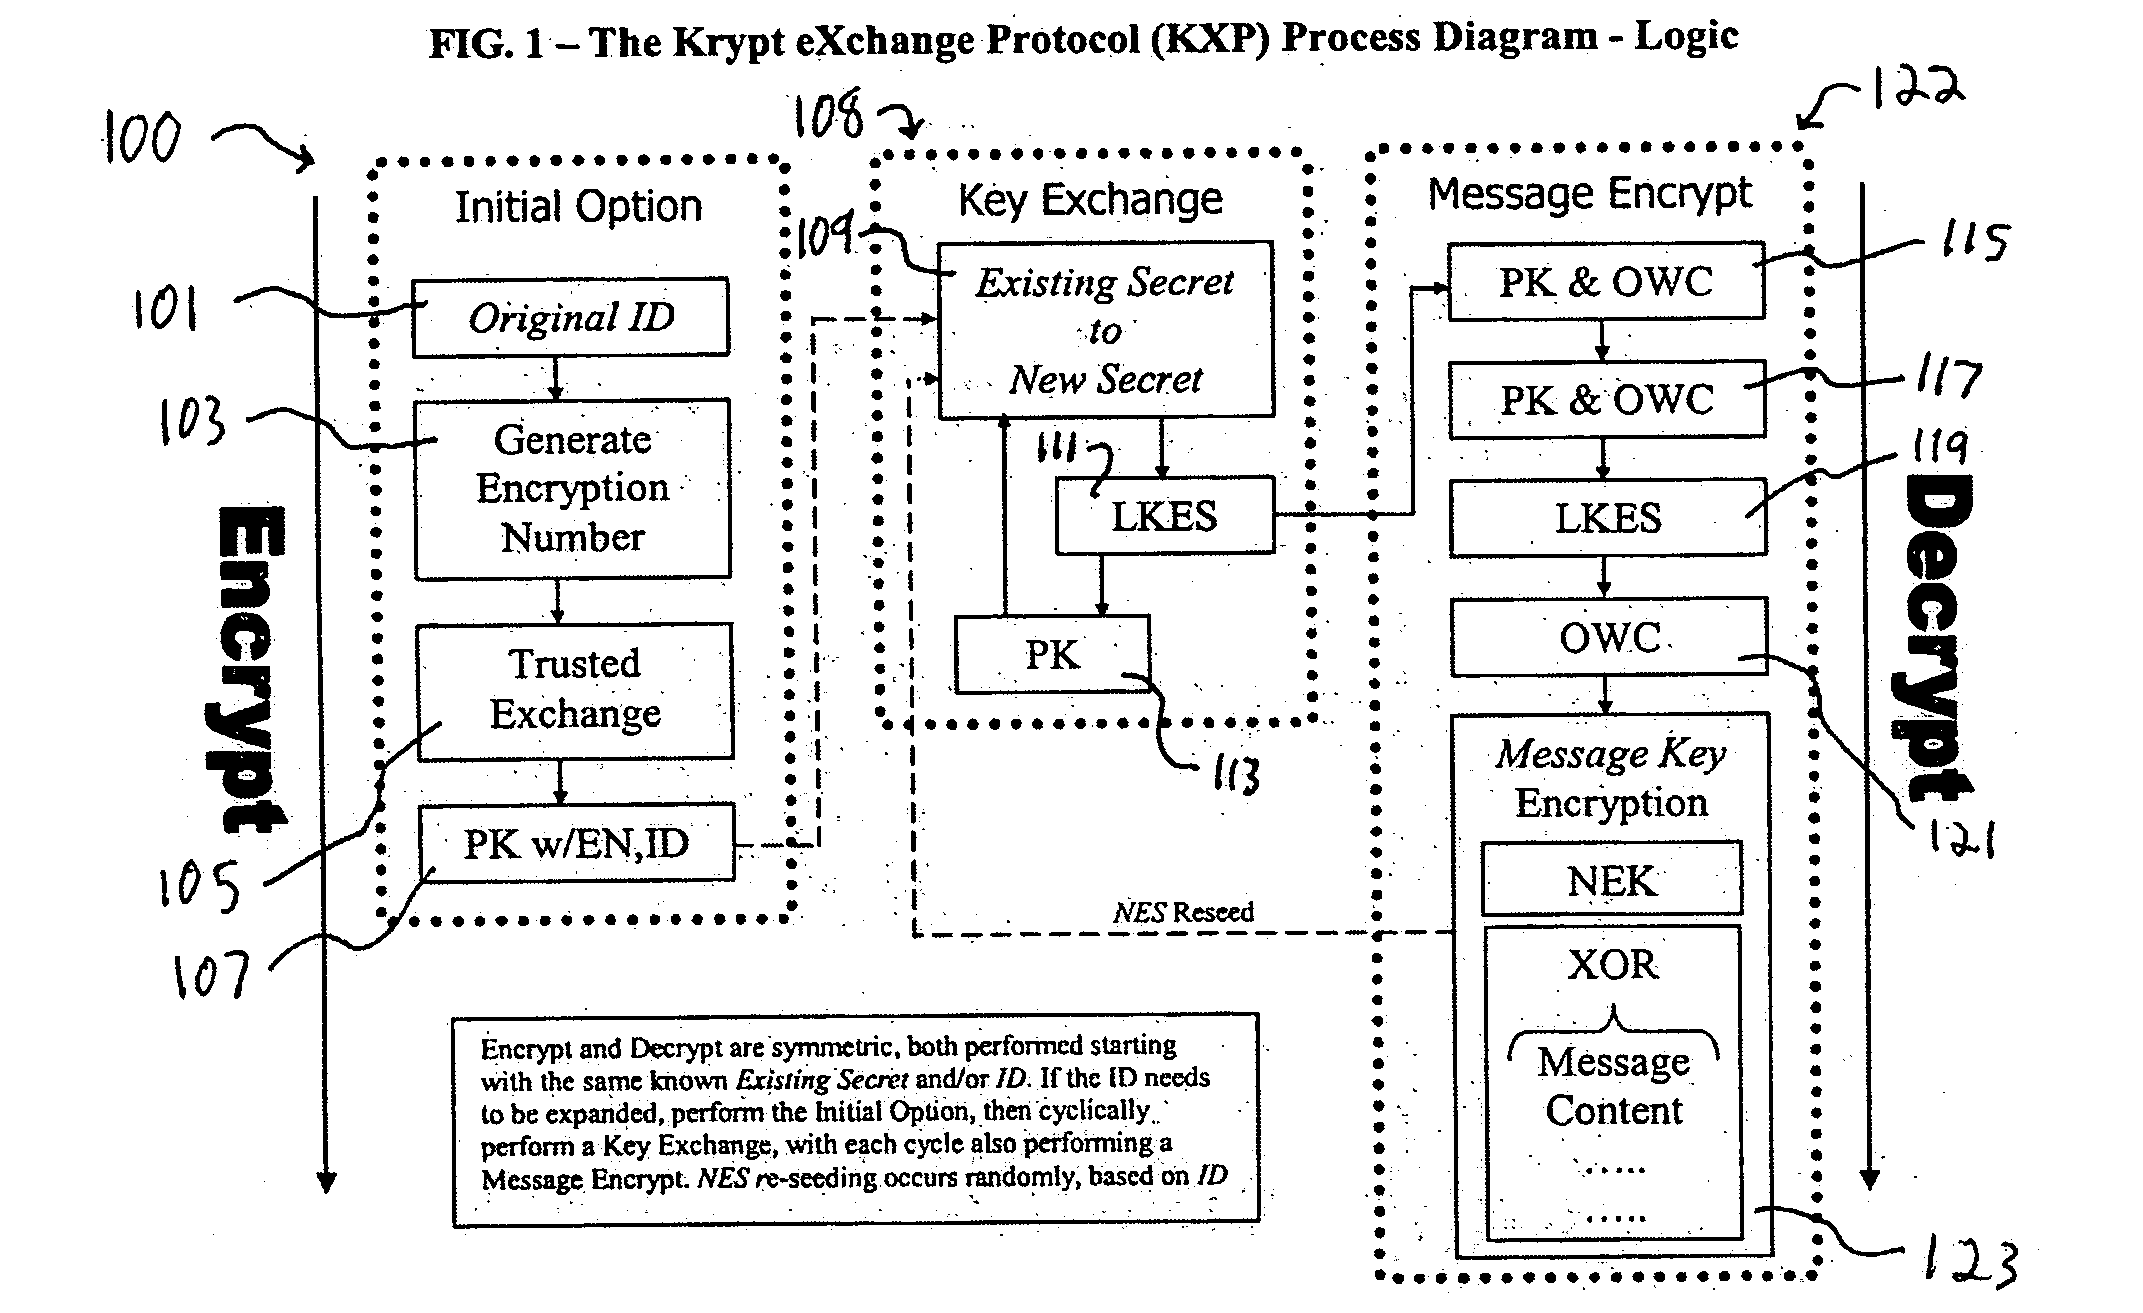 Method and system for performing perfectly secure key exchange and authenticated messaging